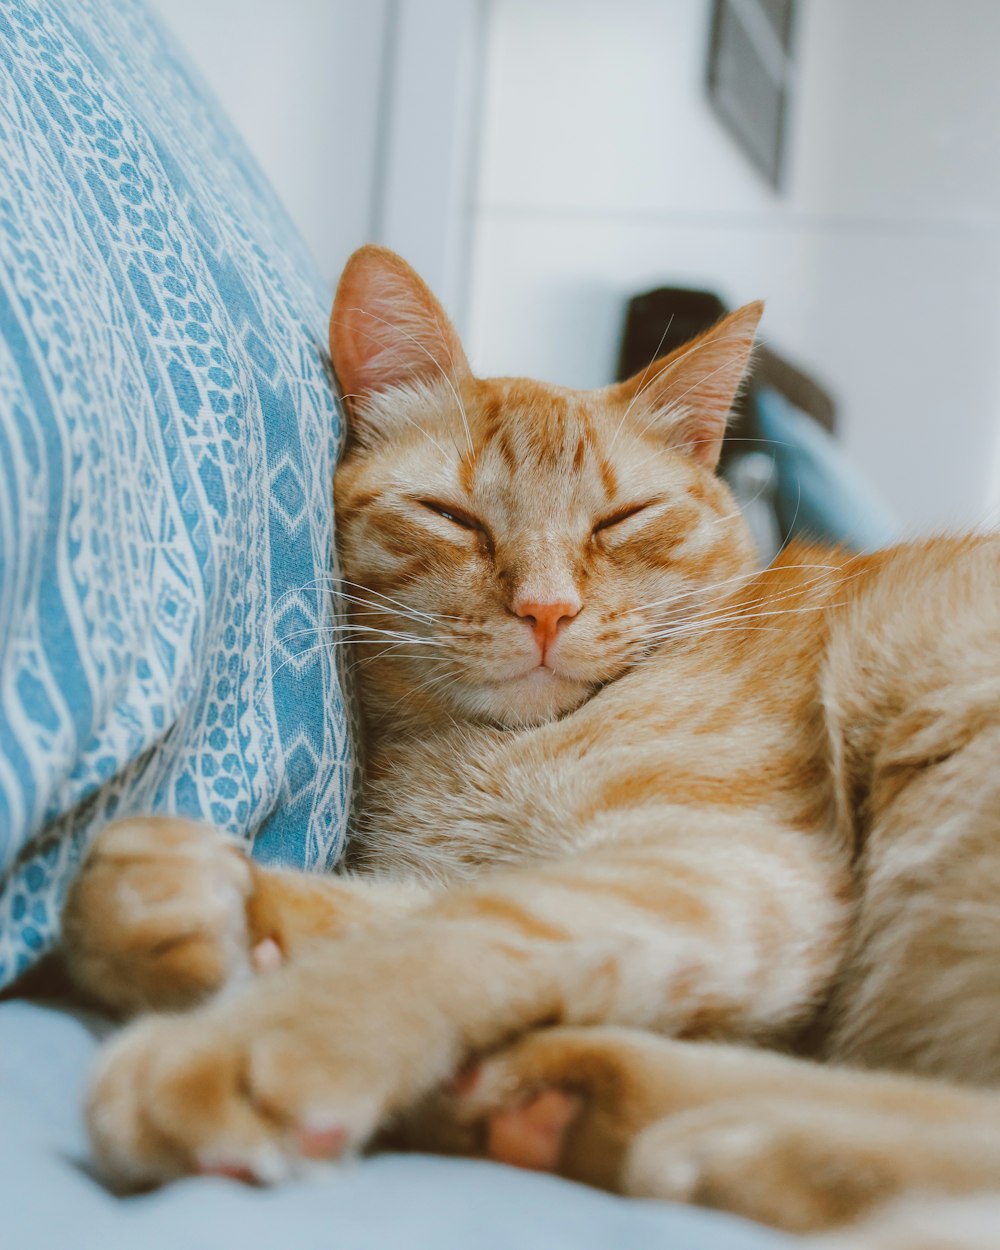 orange tabby cat lying on blue and white textile